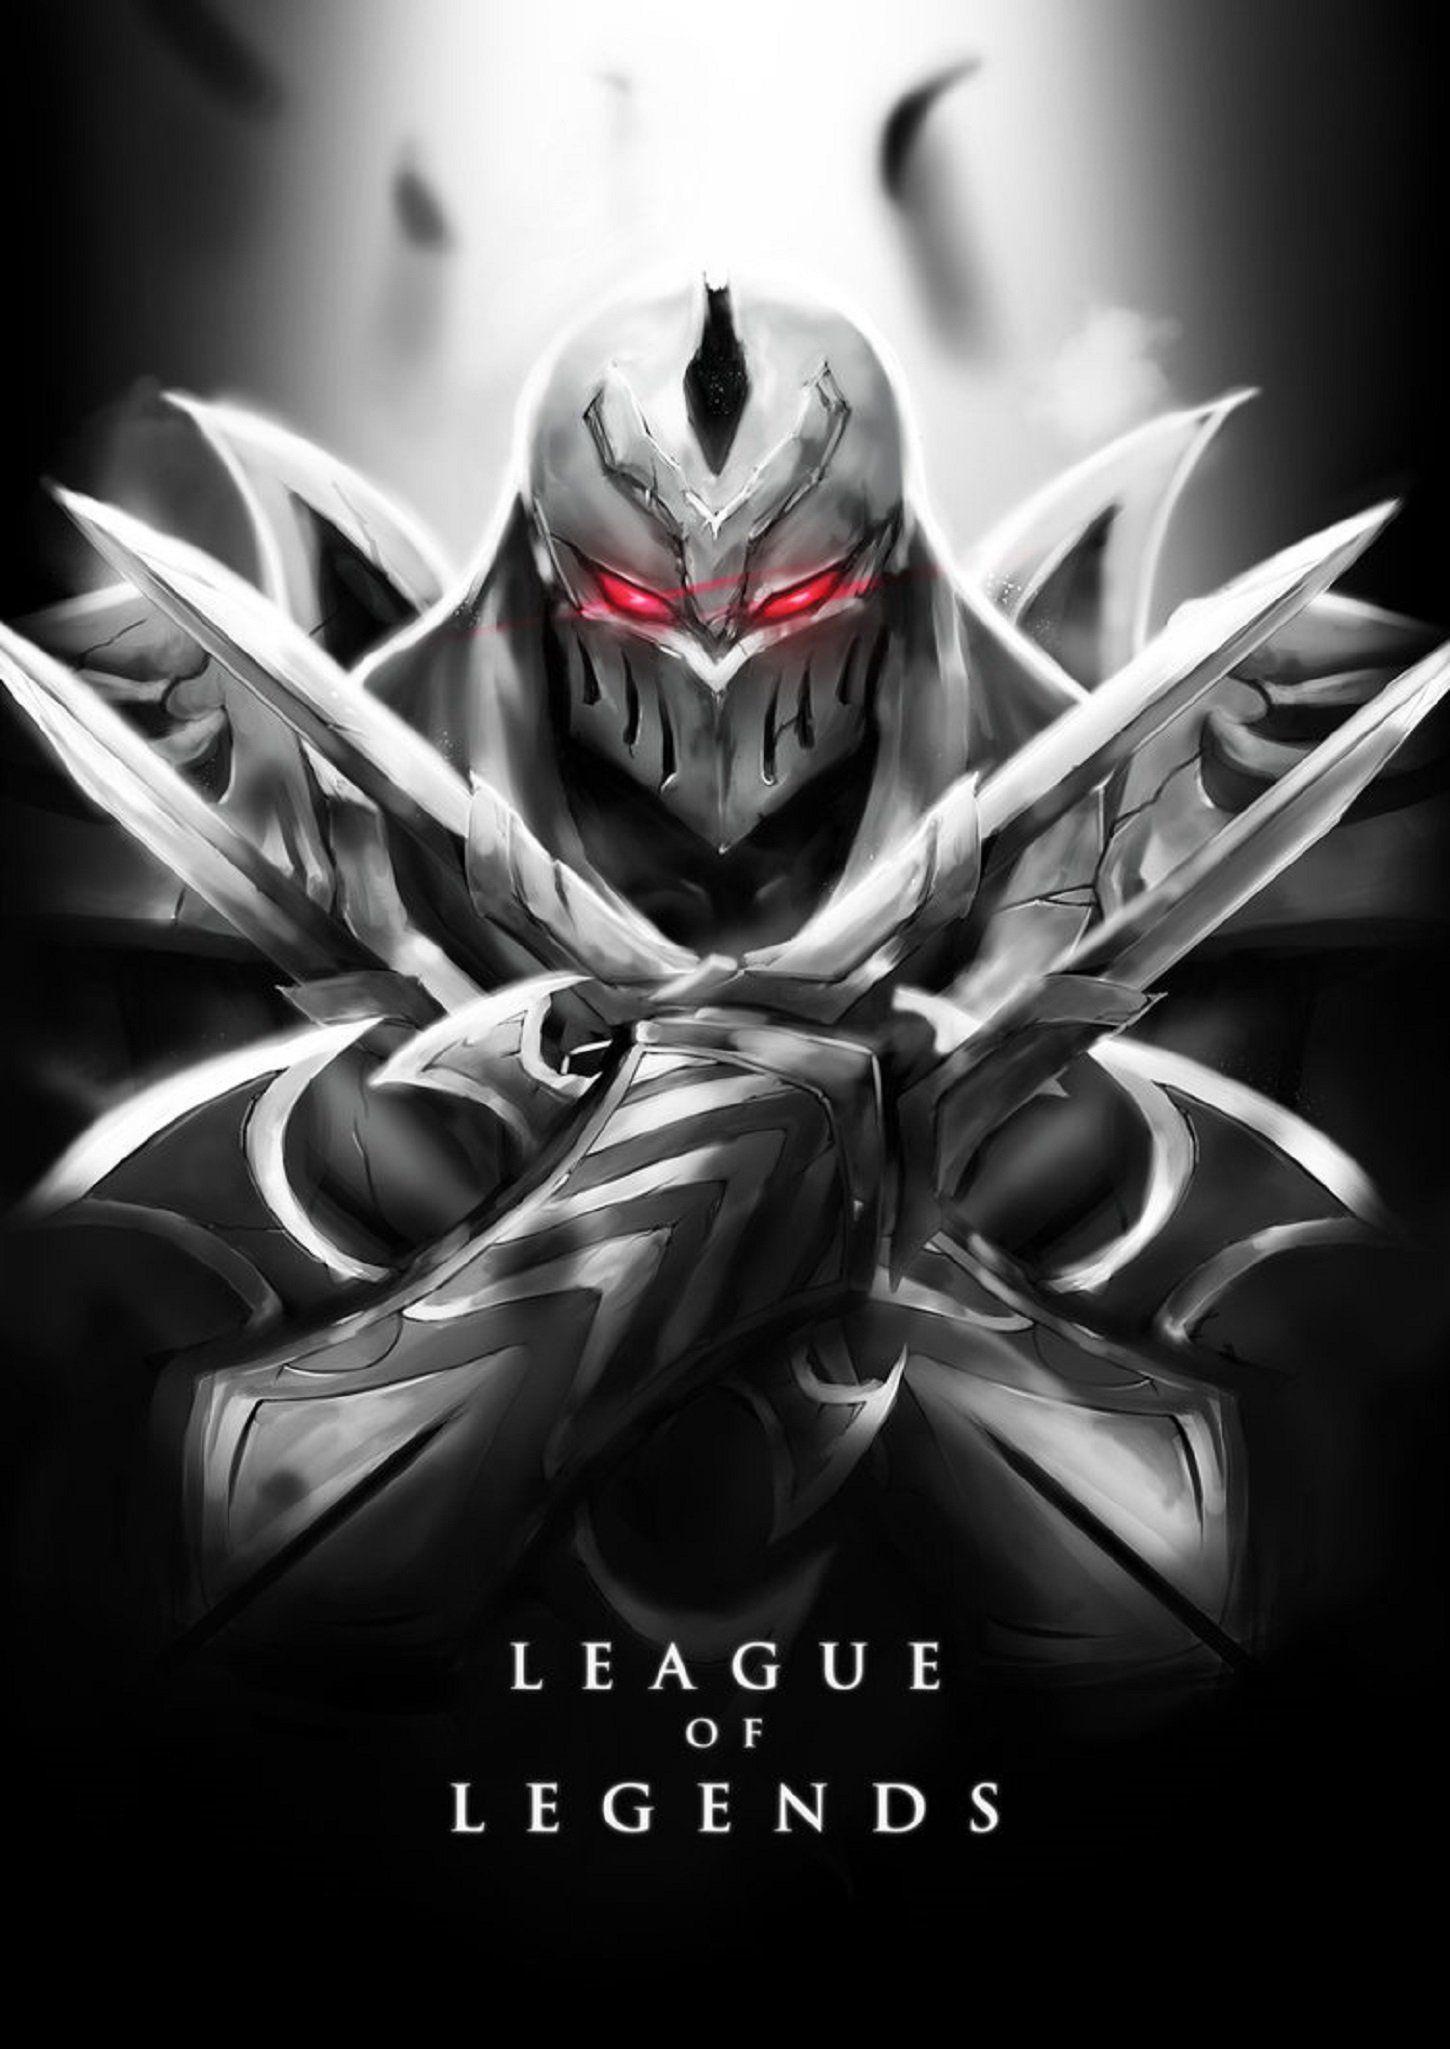 90+ Zed (League Of Legends) HD Wallpapers and Backgrounds